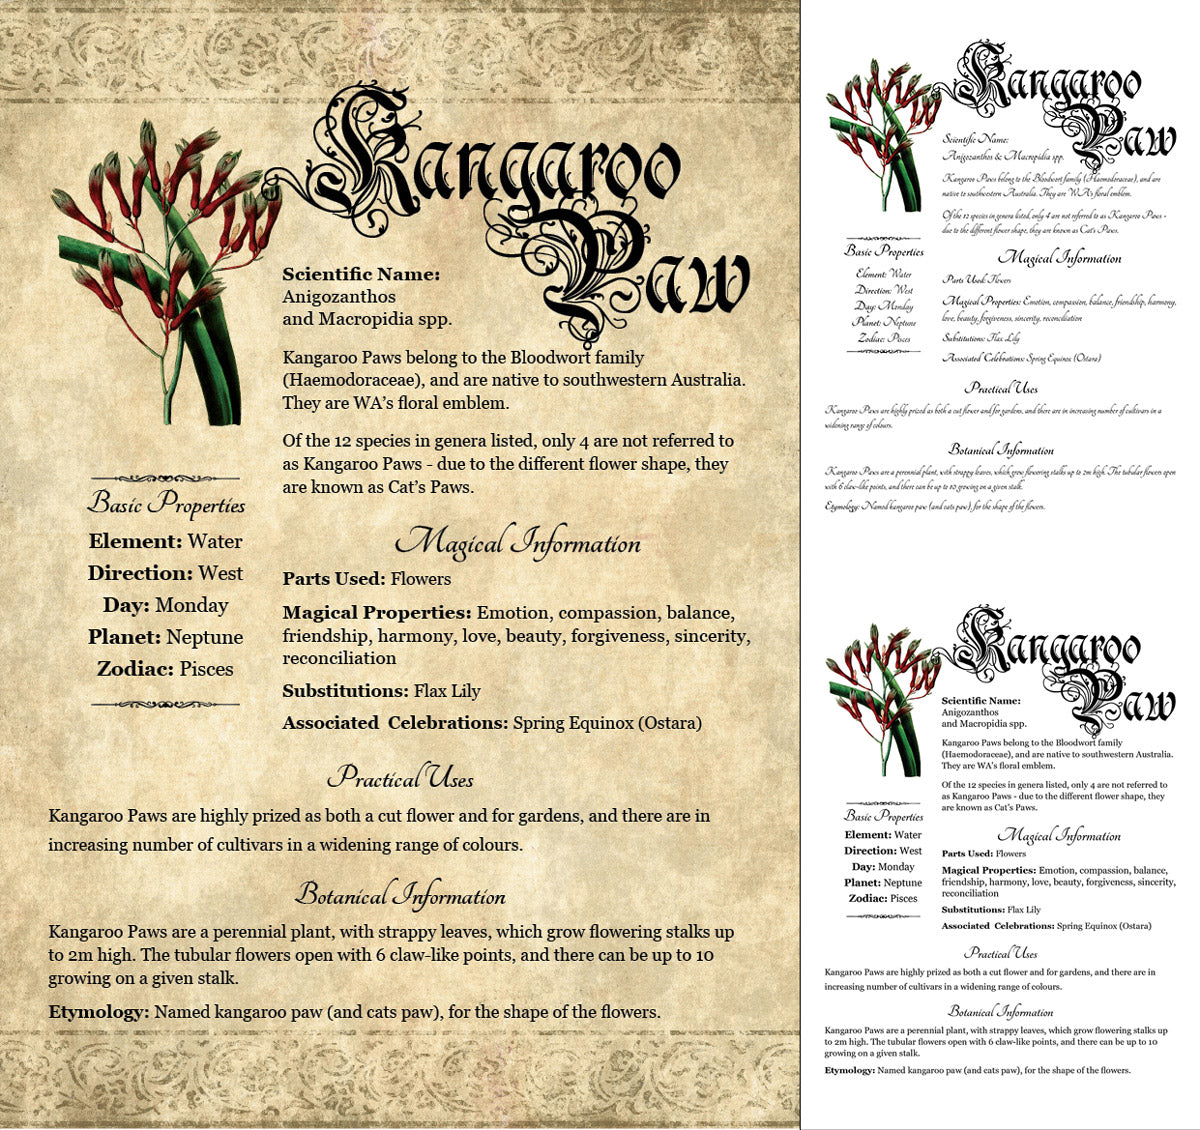 Collage of 3 versions of the Kangaroo Paw grimoire page: with a readable/serif vs script font + with/without background